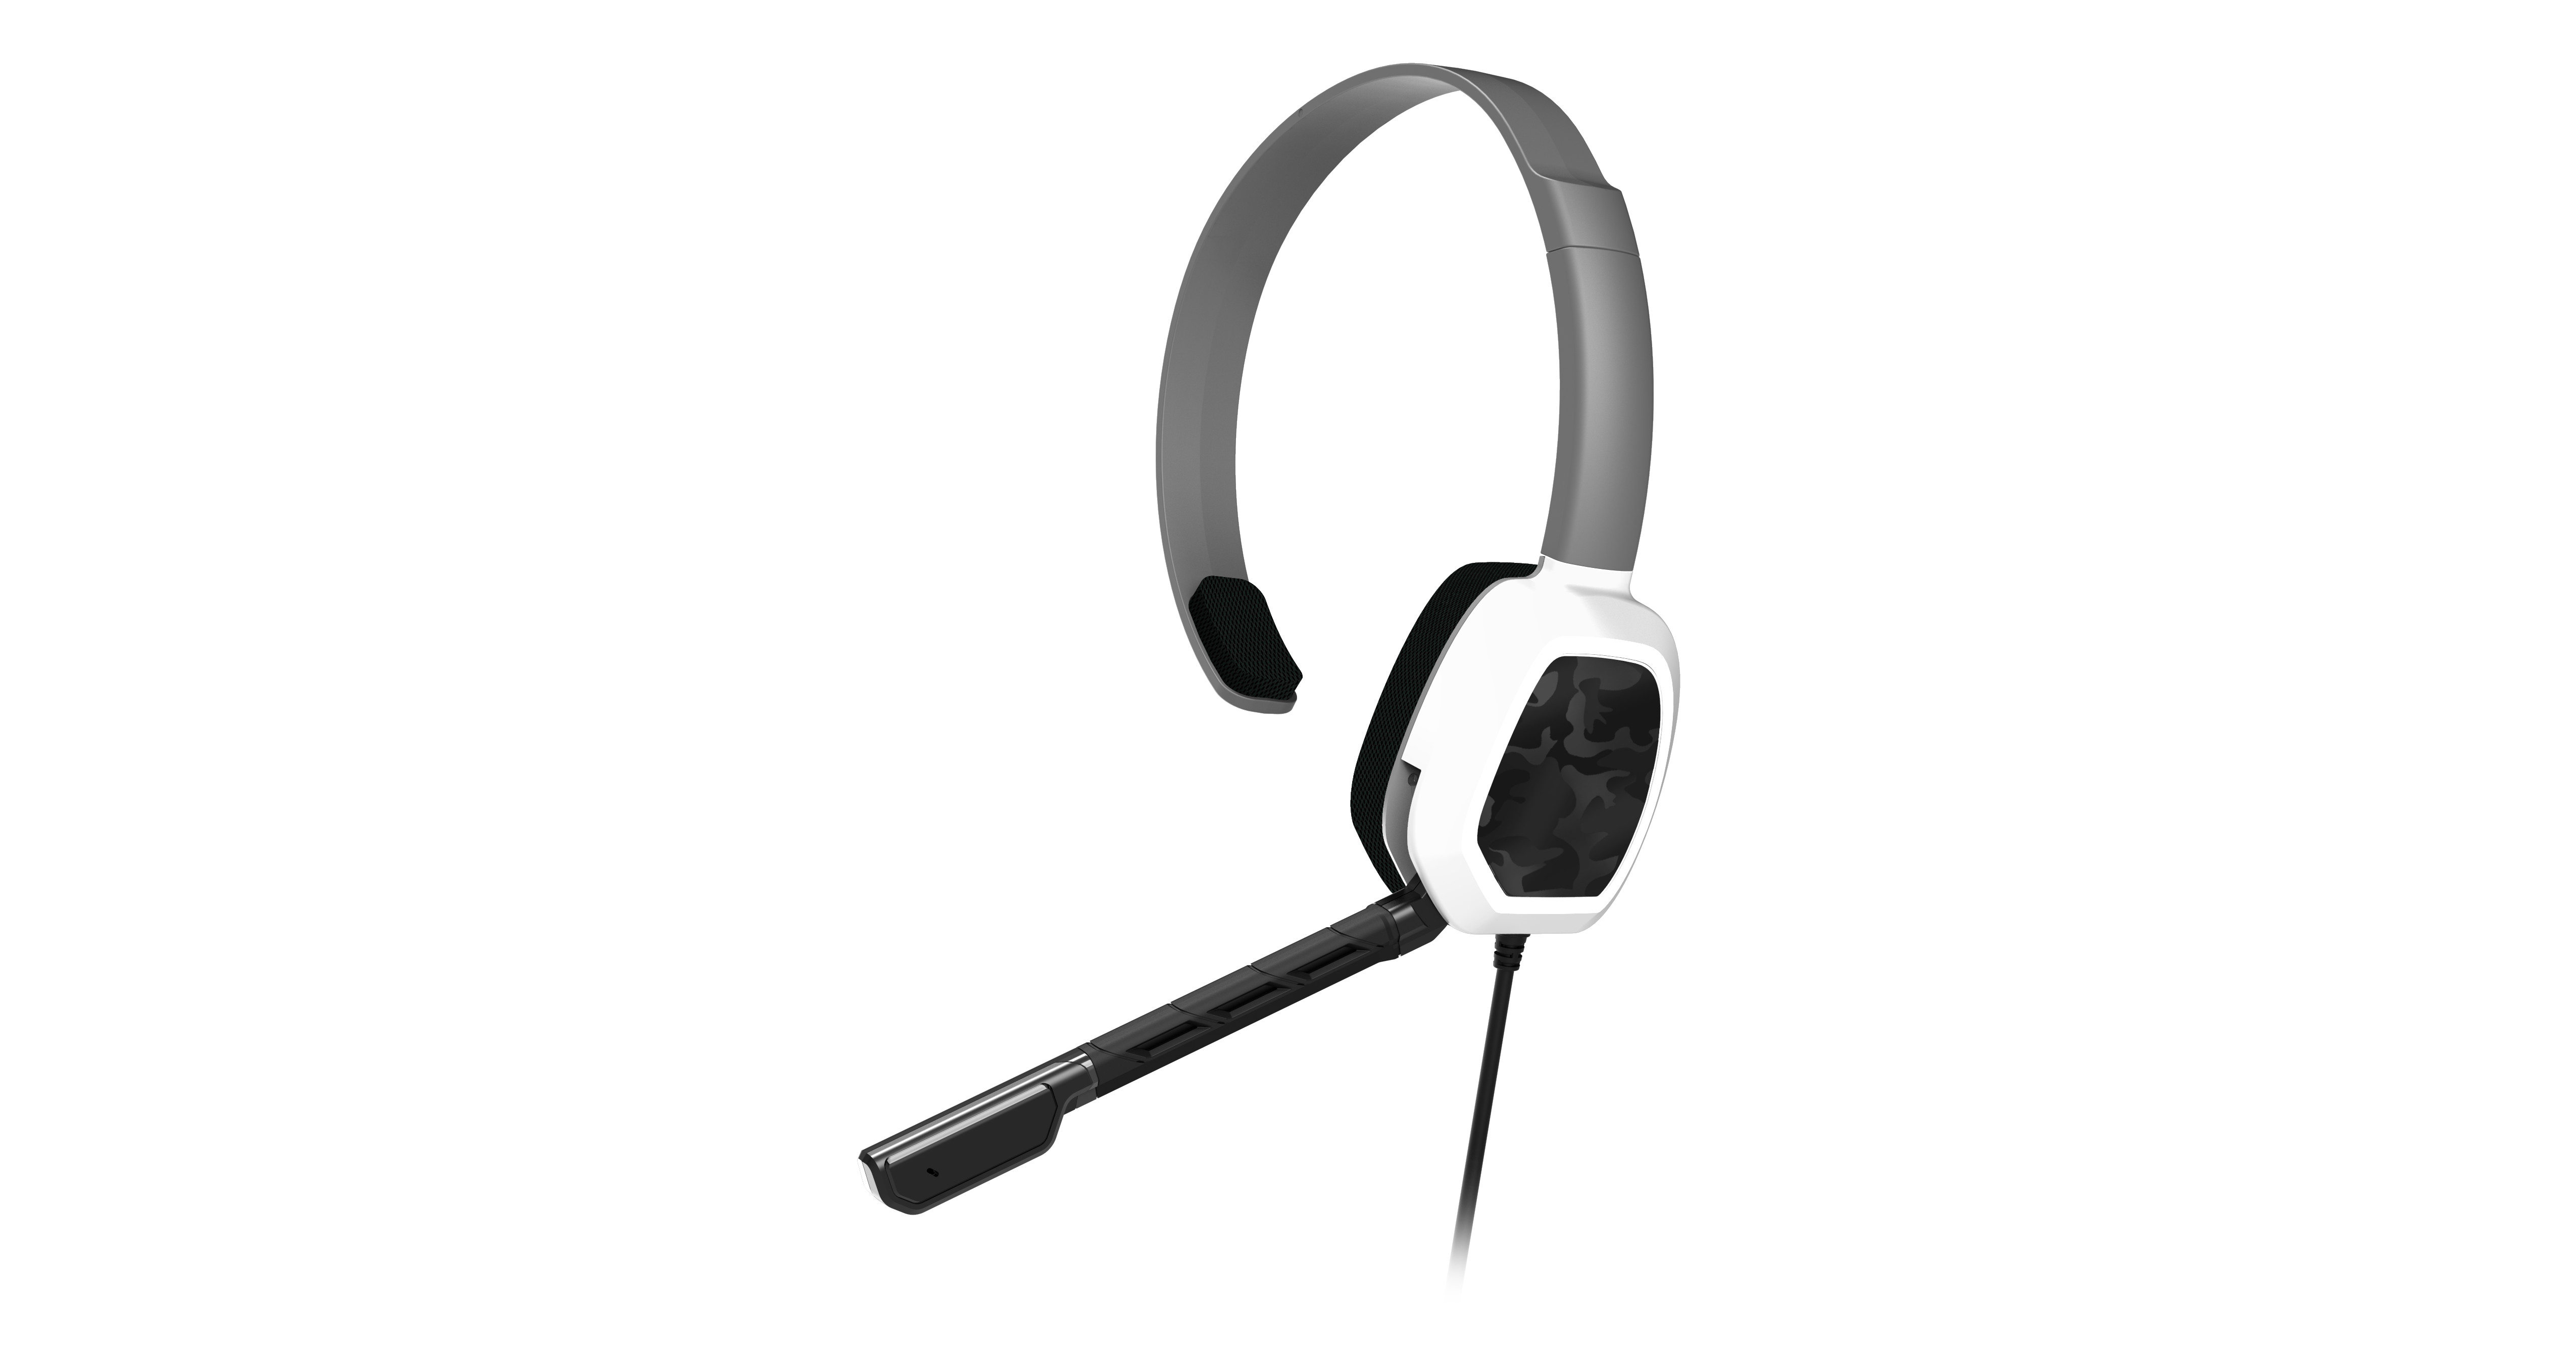 wireless headset for xbox one gamestop